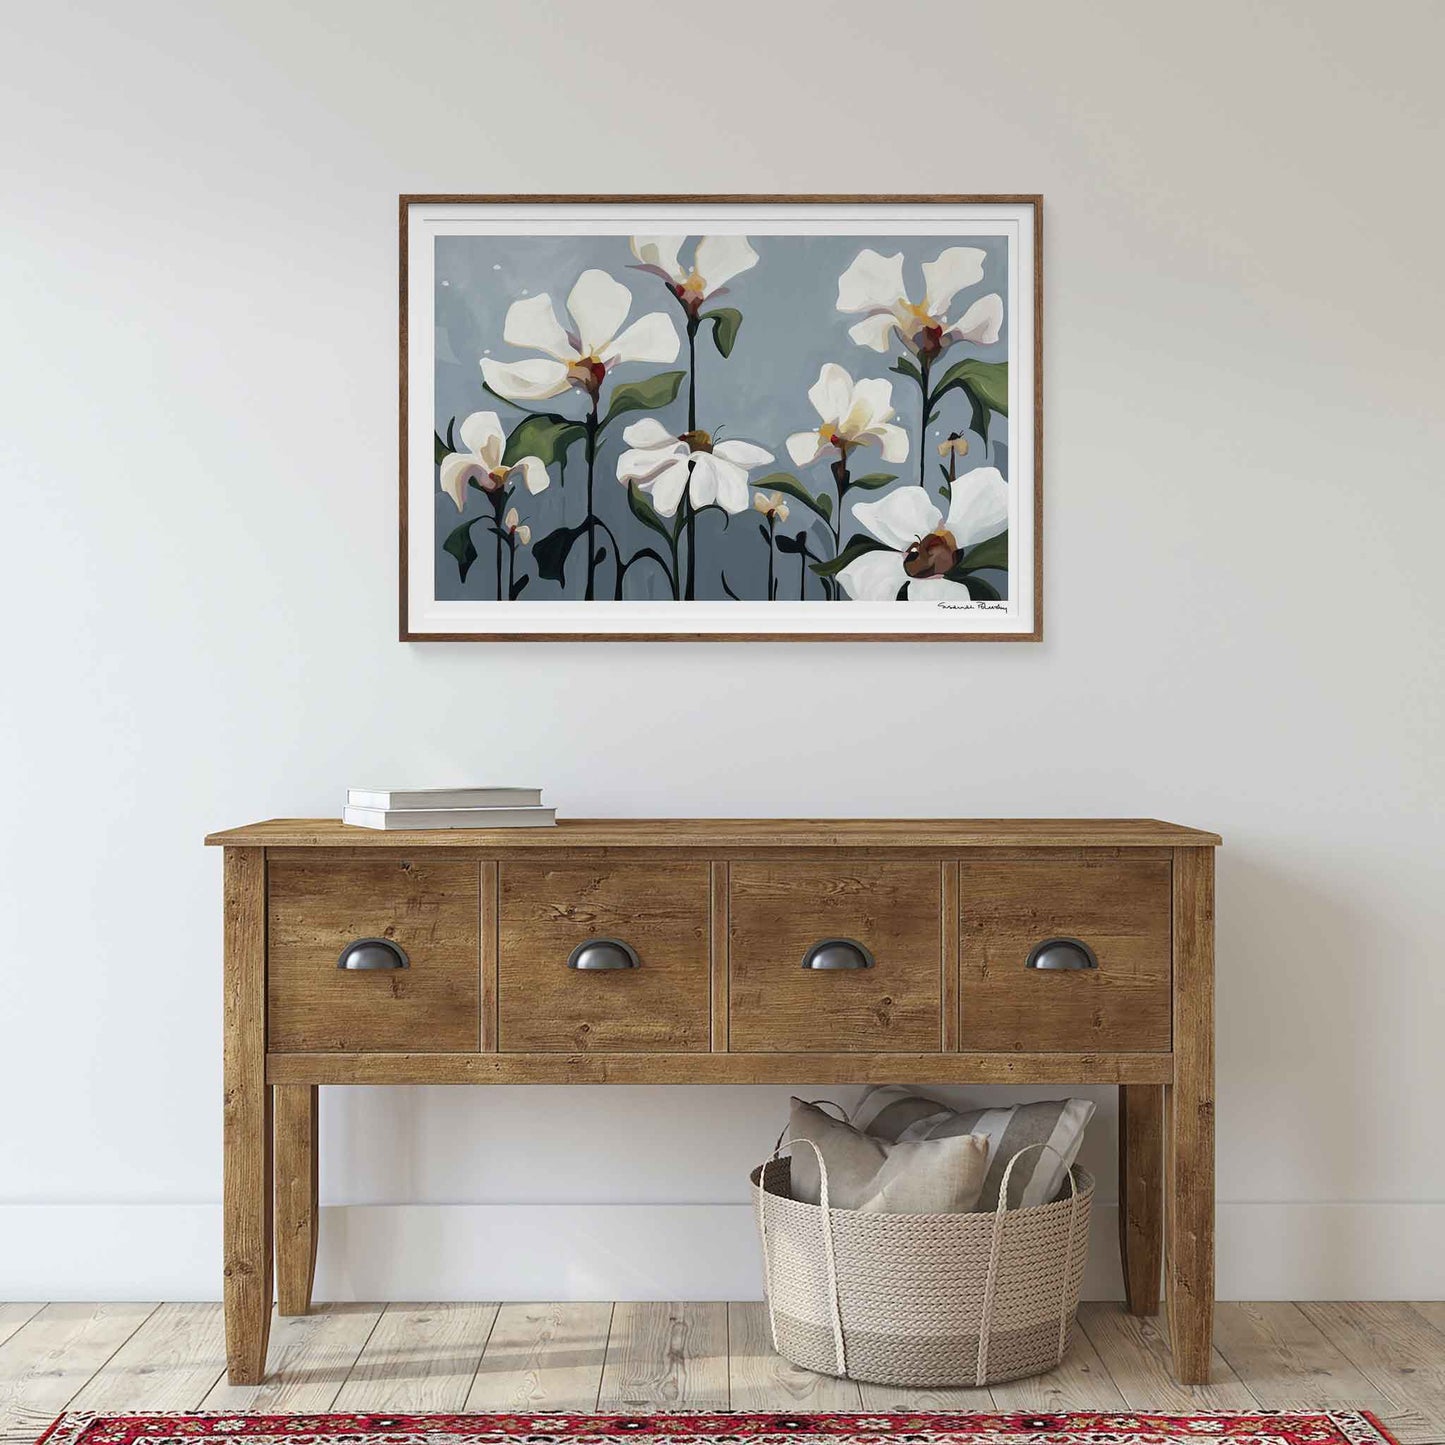 Large horizontal acrylic flower painting print with creamy blossoms on grey background hanging as wall art with walnut frame